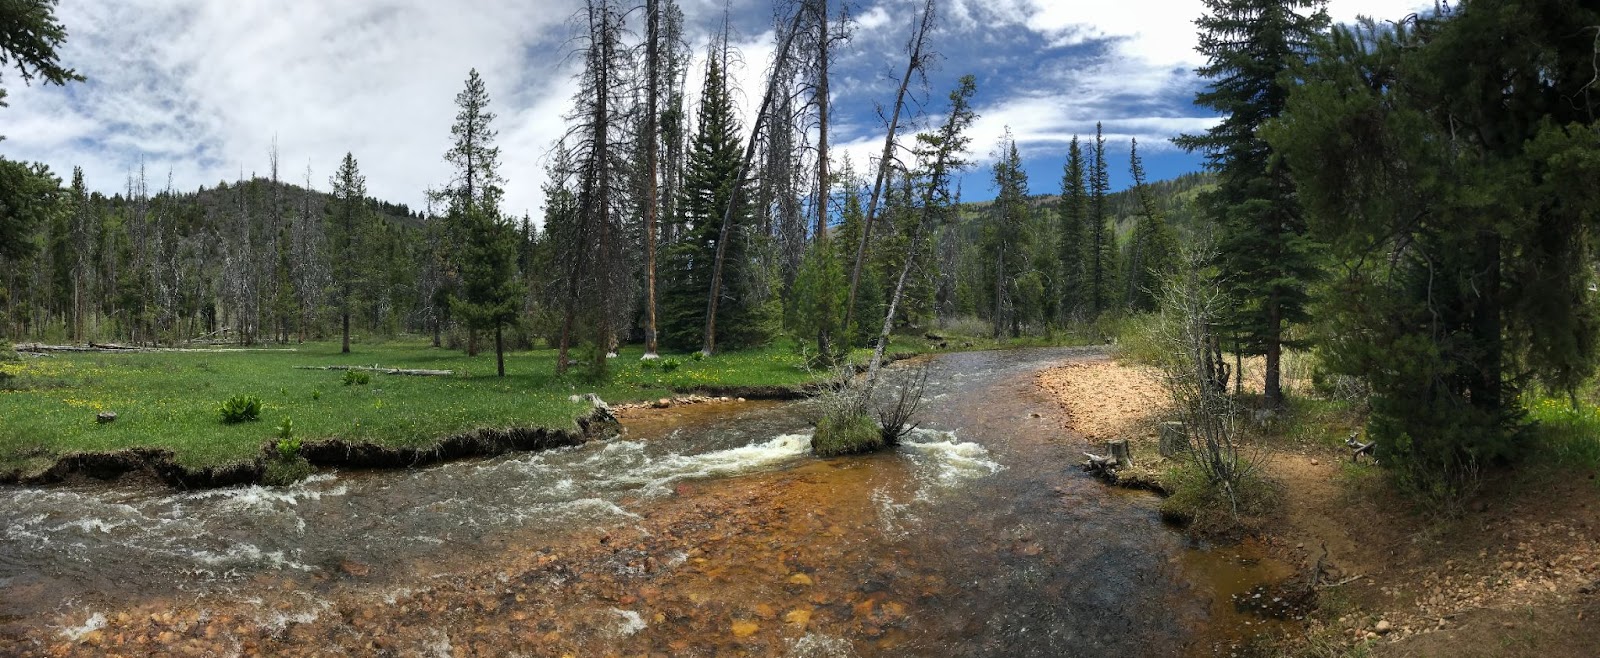 Utah forest with river